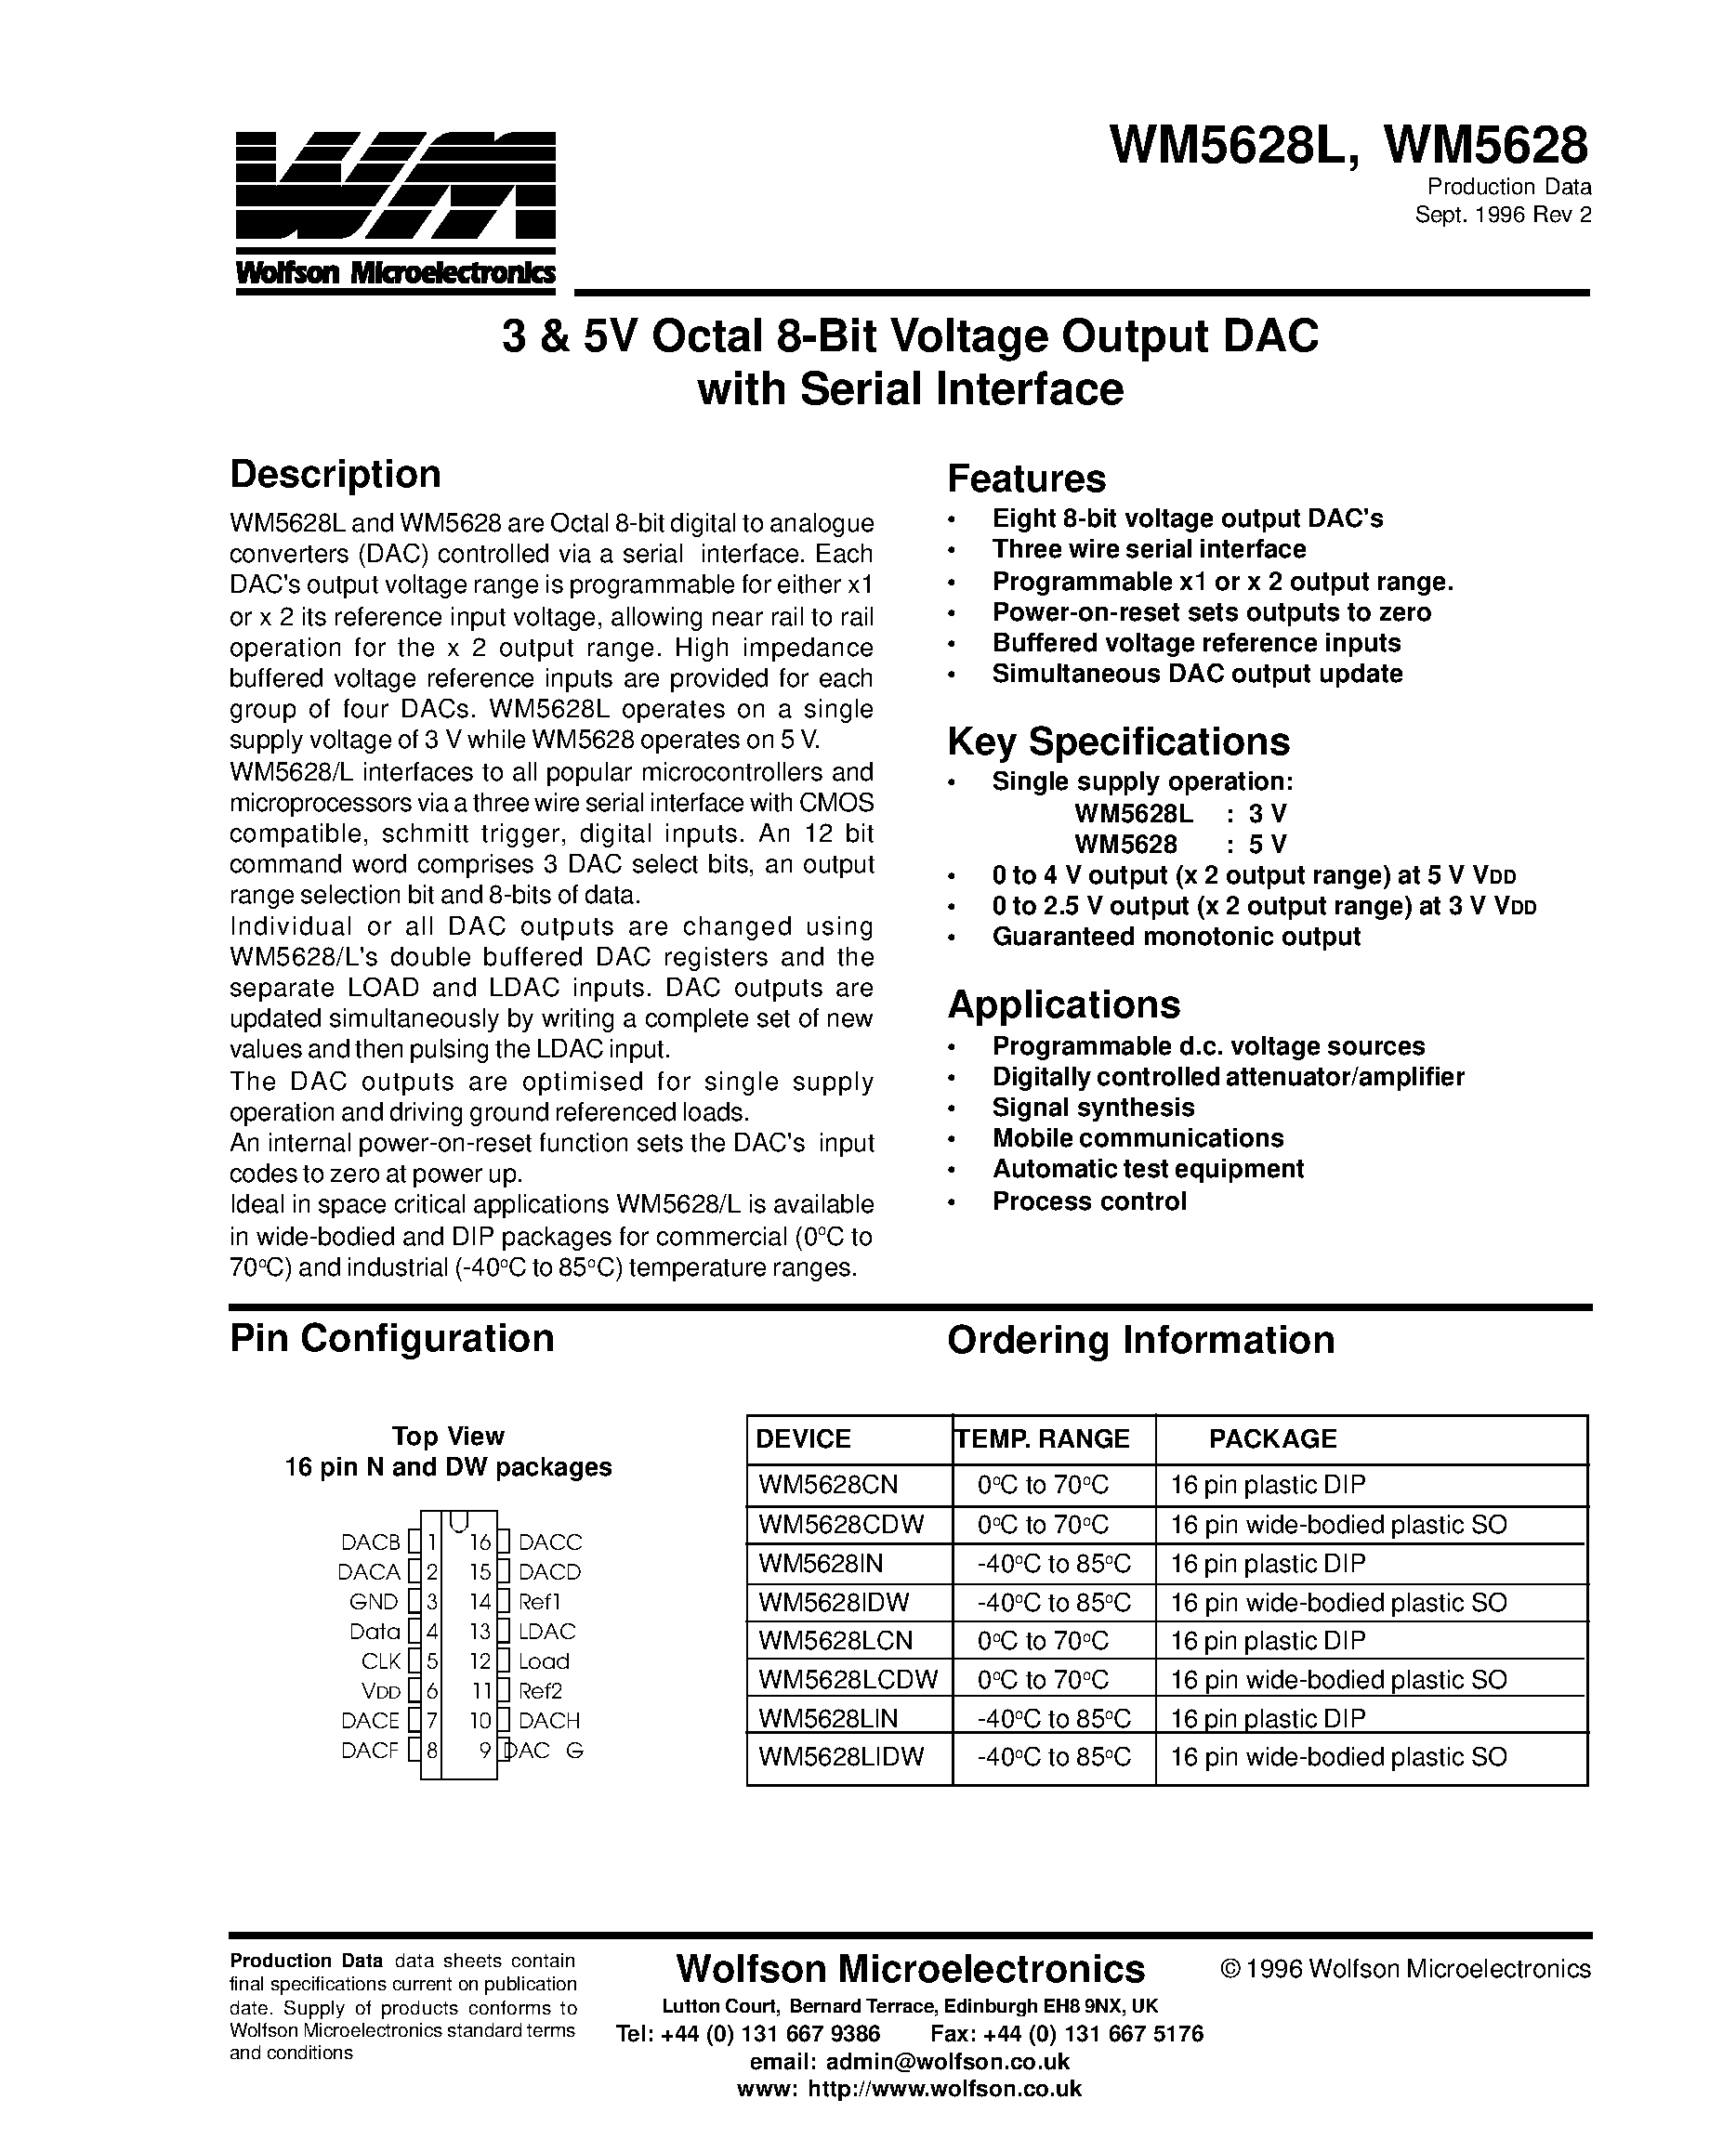 Datasheet WM5628 - 3 & 5V Octal 8-Bit Voltage Output DAC with Serial Interface page 1